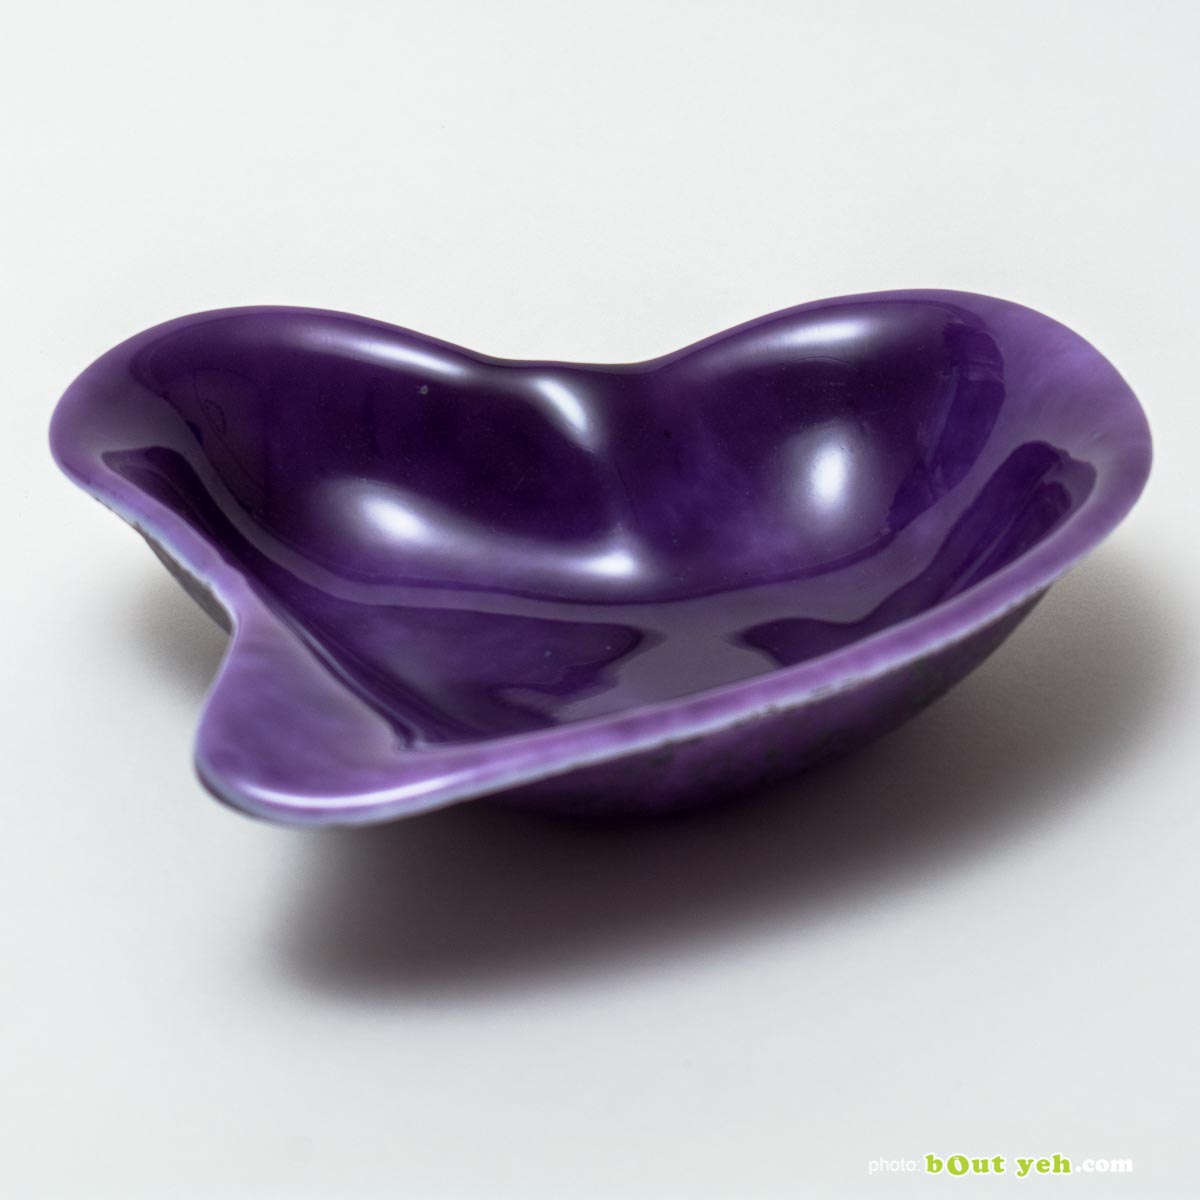 Gold purple opal heart shaped bowl with infused copper by Keith Sheppard Irish glassware - photo 1605